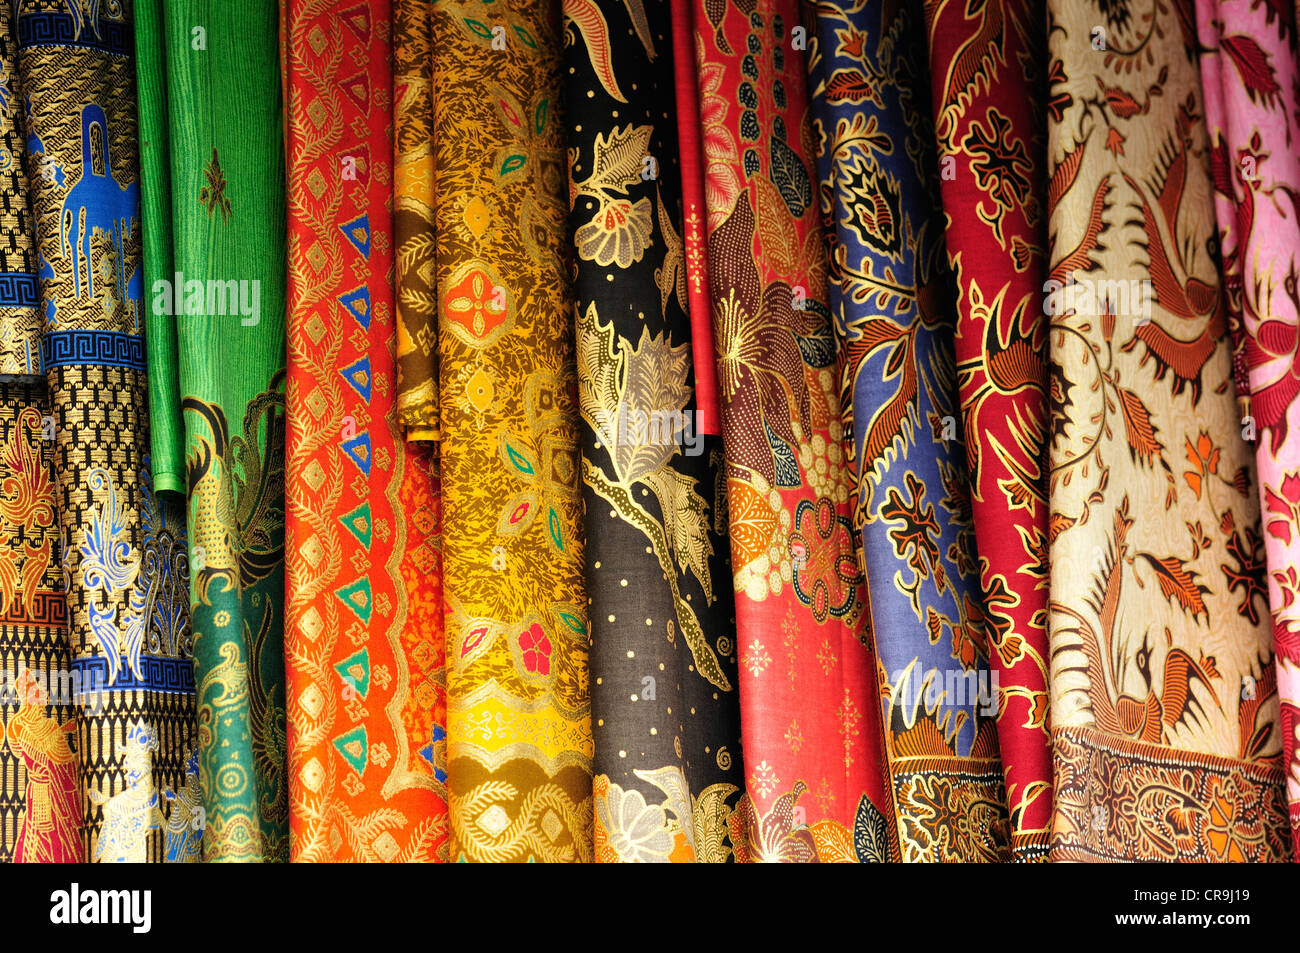 Sarong Indonesia High Resolution Stock Photography and Images - Alamy